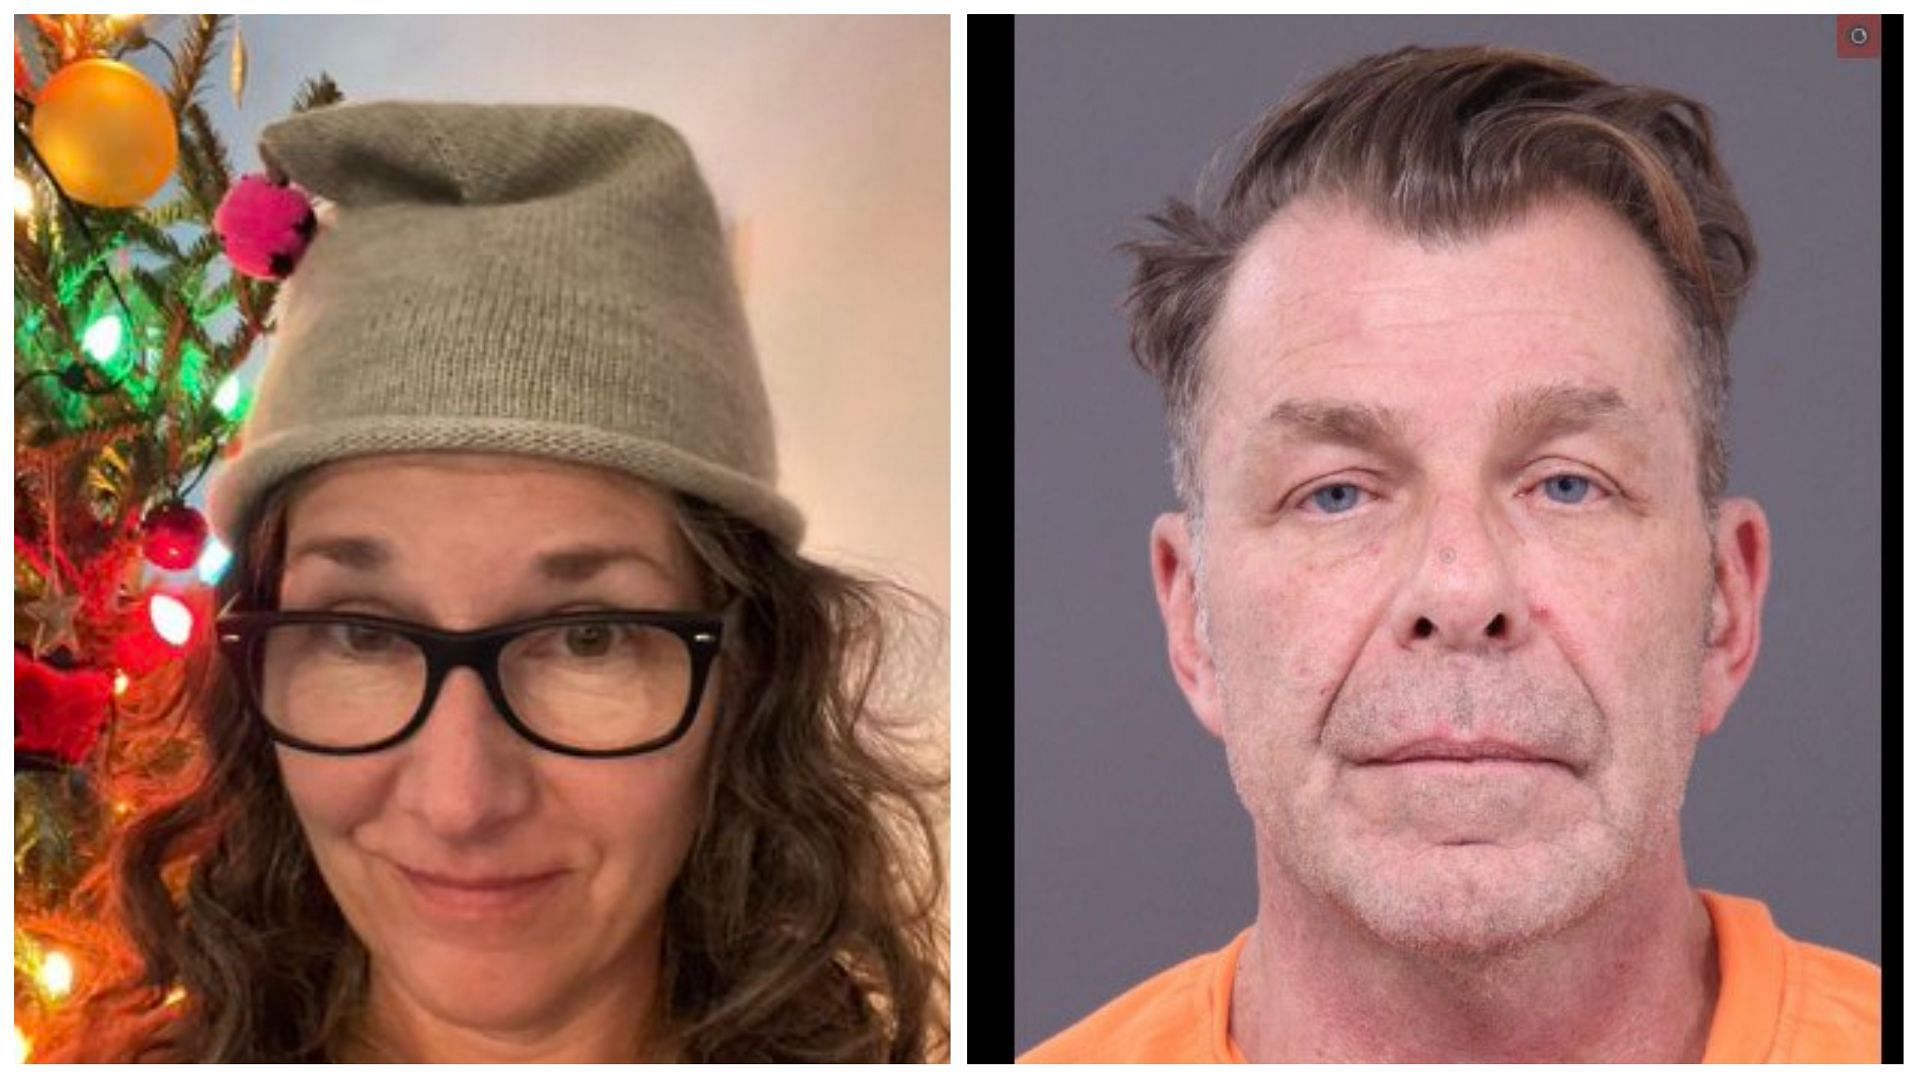 Stephen Capaldi (right) charged with murdering wife Elizabeth Capaldi (left), (Images via Sleuthie and @JoeHoldenCBS3/Twitter)